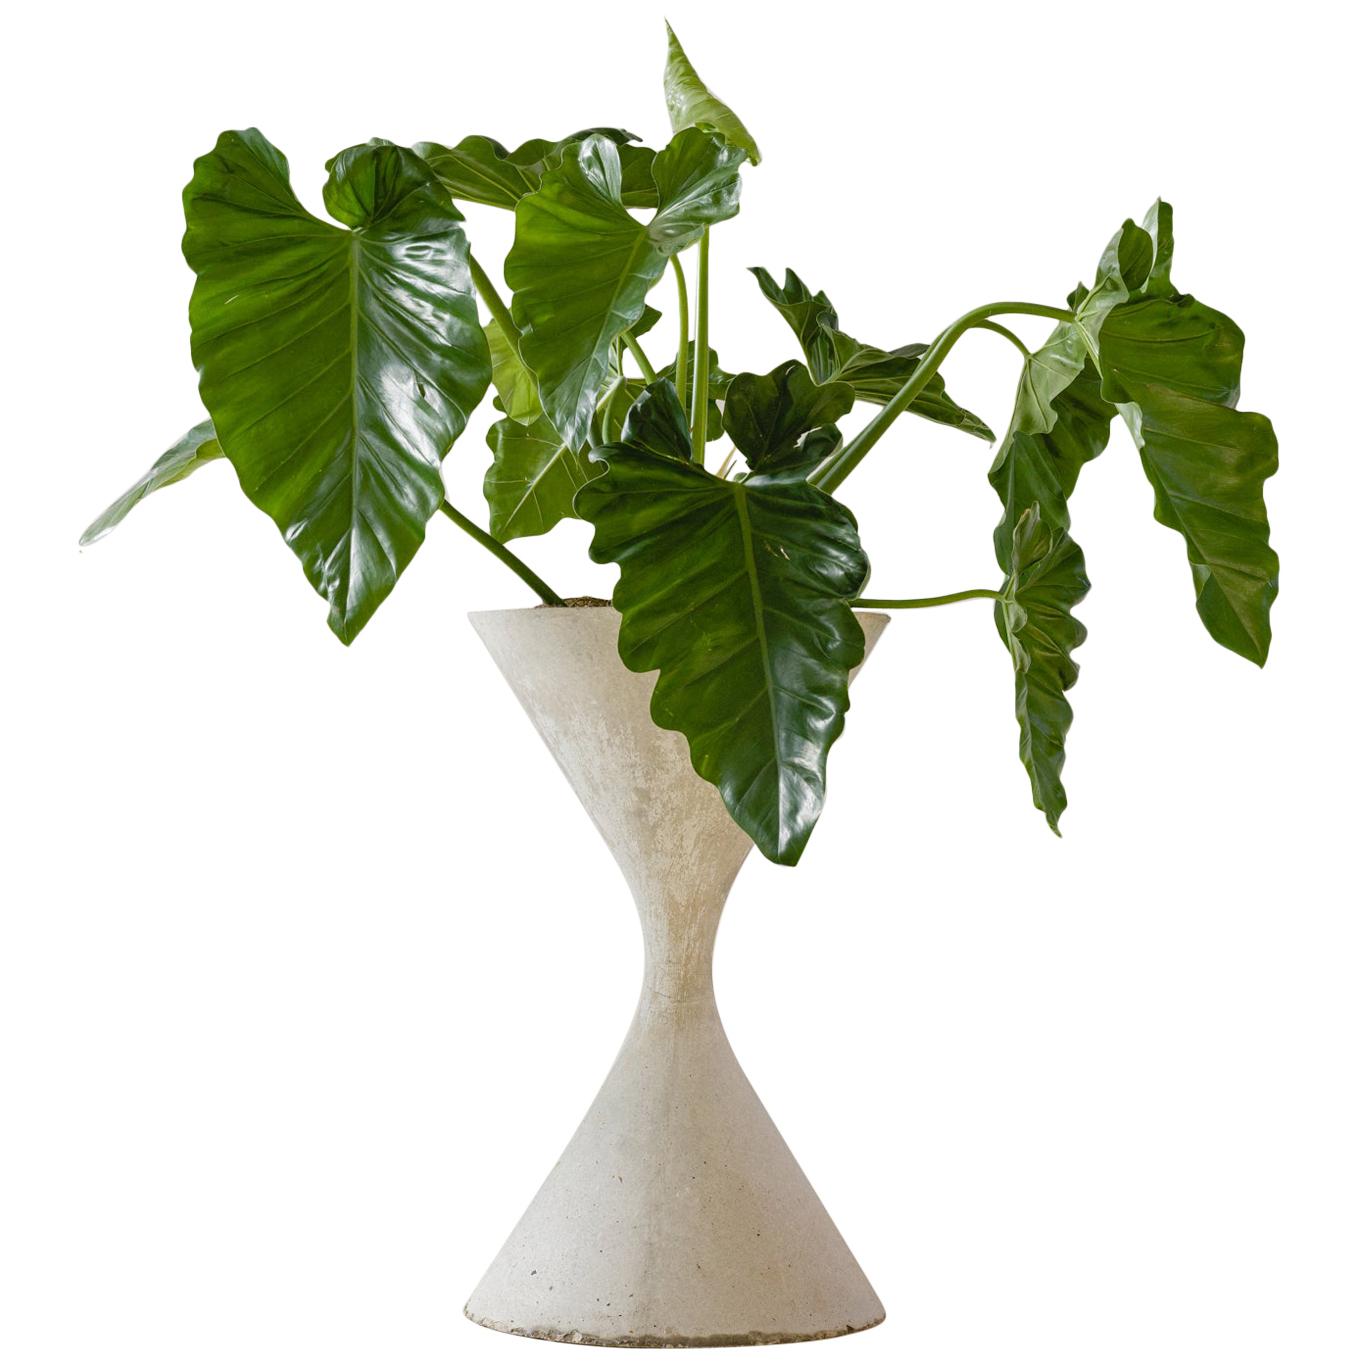 Spindel Planter by Willy Guhl, Produced by Eternit Brazil, 1960s